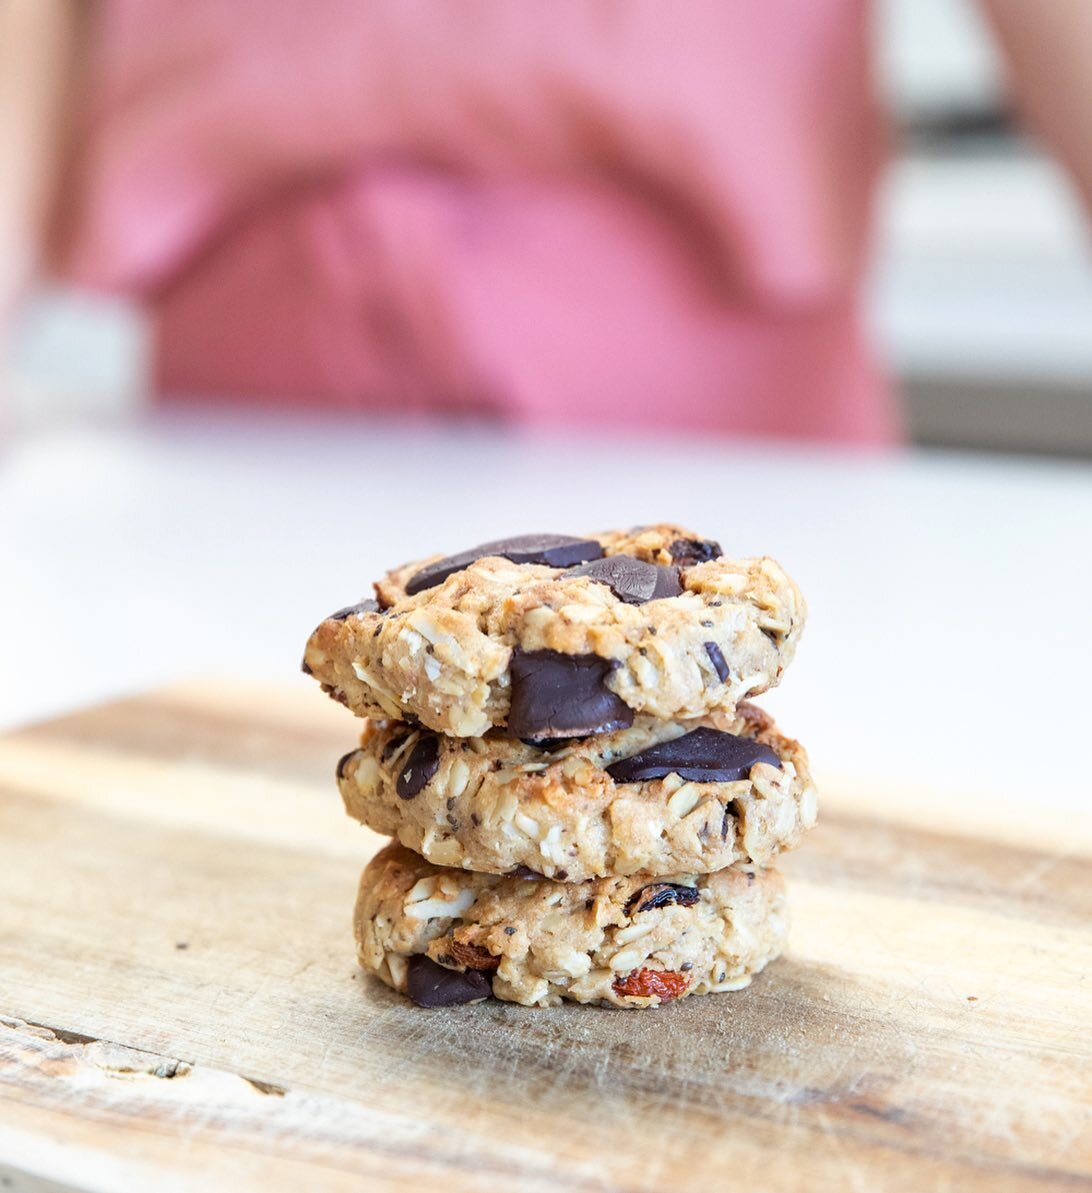 🍪 CHOC CHIP LACTATION COOKIES 🍪

I made myself these cookies for about 2 years. I baked batches of them for new mama friends and perfected them over time.

Today I have launched my website so I thought I&rsquo;d share this recipe first. Because whe